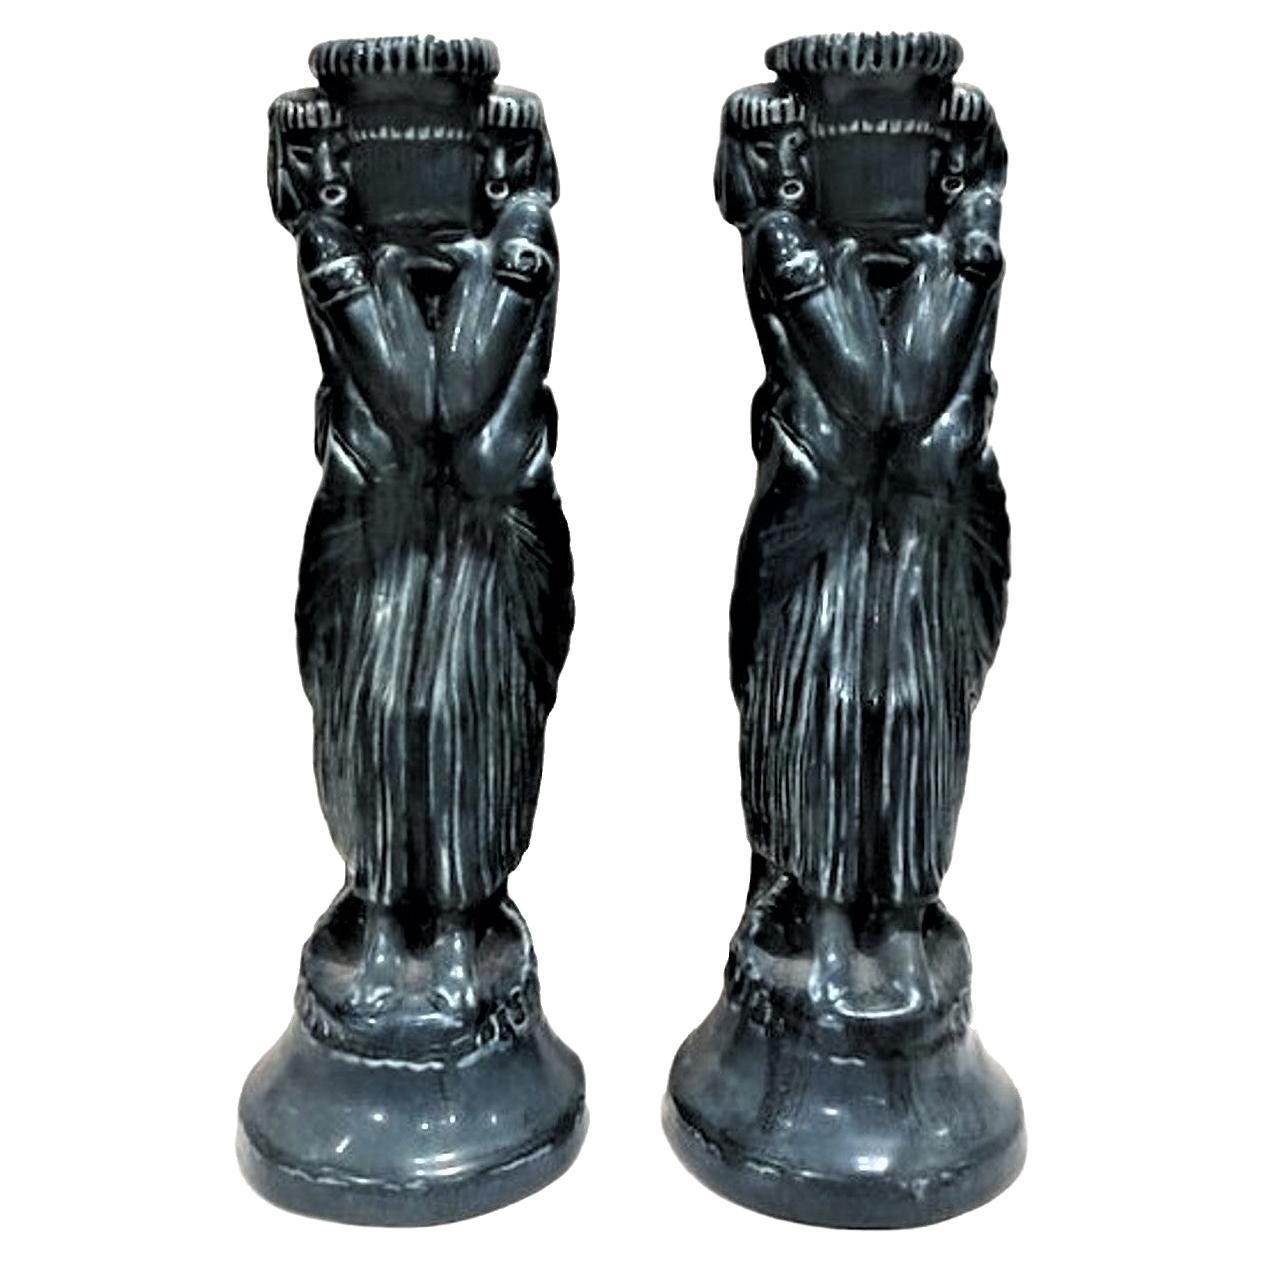 A Pair of Art Deco Ceramic Candle Holders by Roockwood Pottery, ca. 1920 For Sale